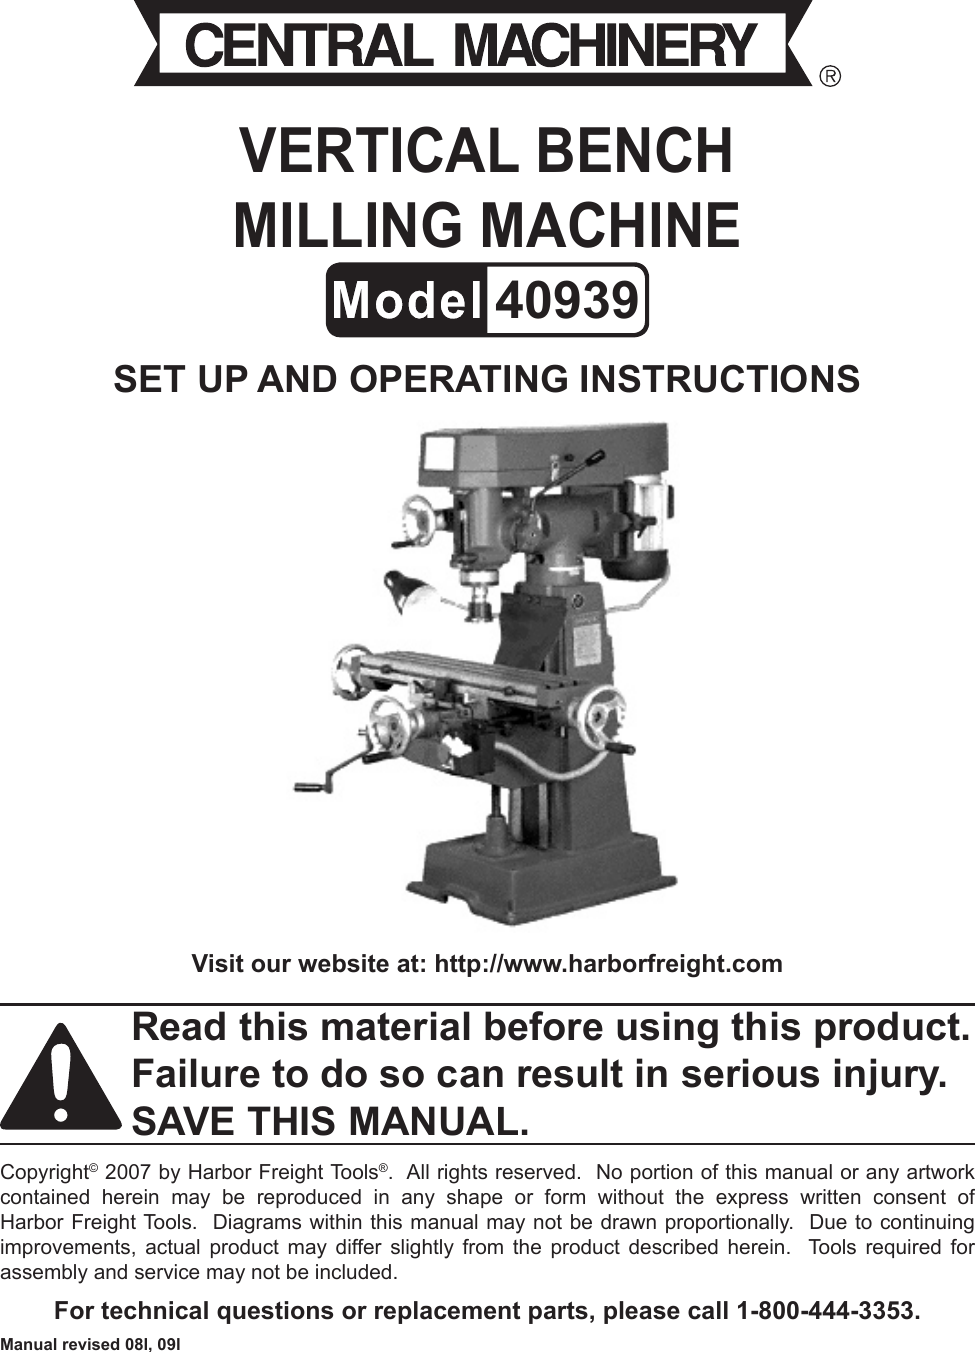 Harbor Freight 9 Speed Vertical Milling Machine Product Manual